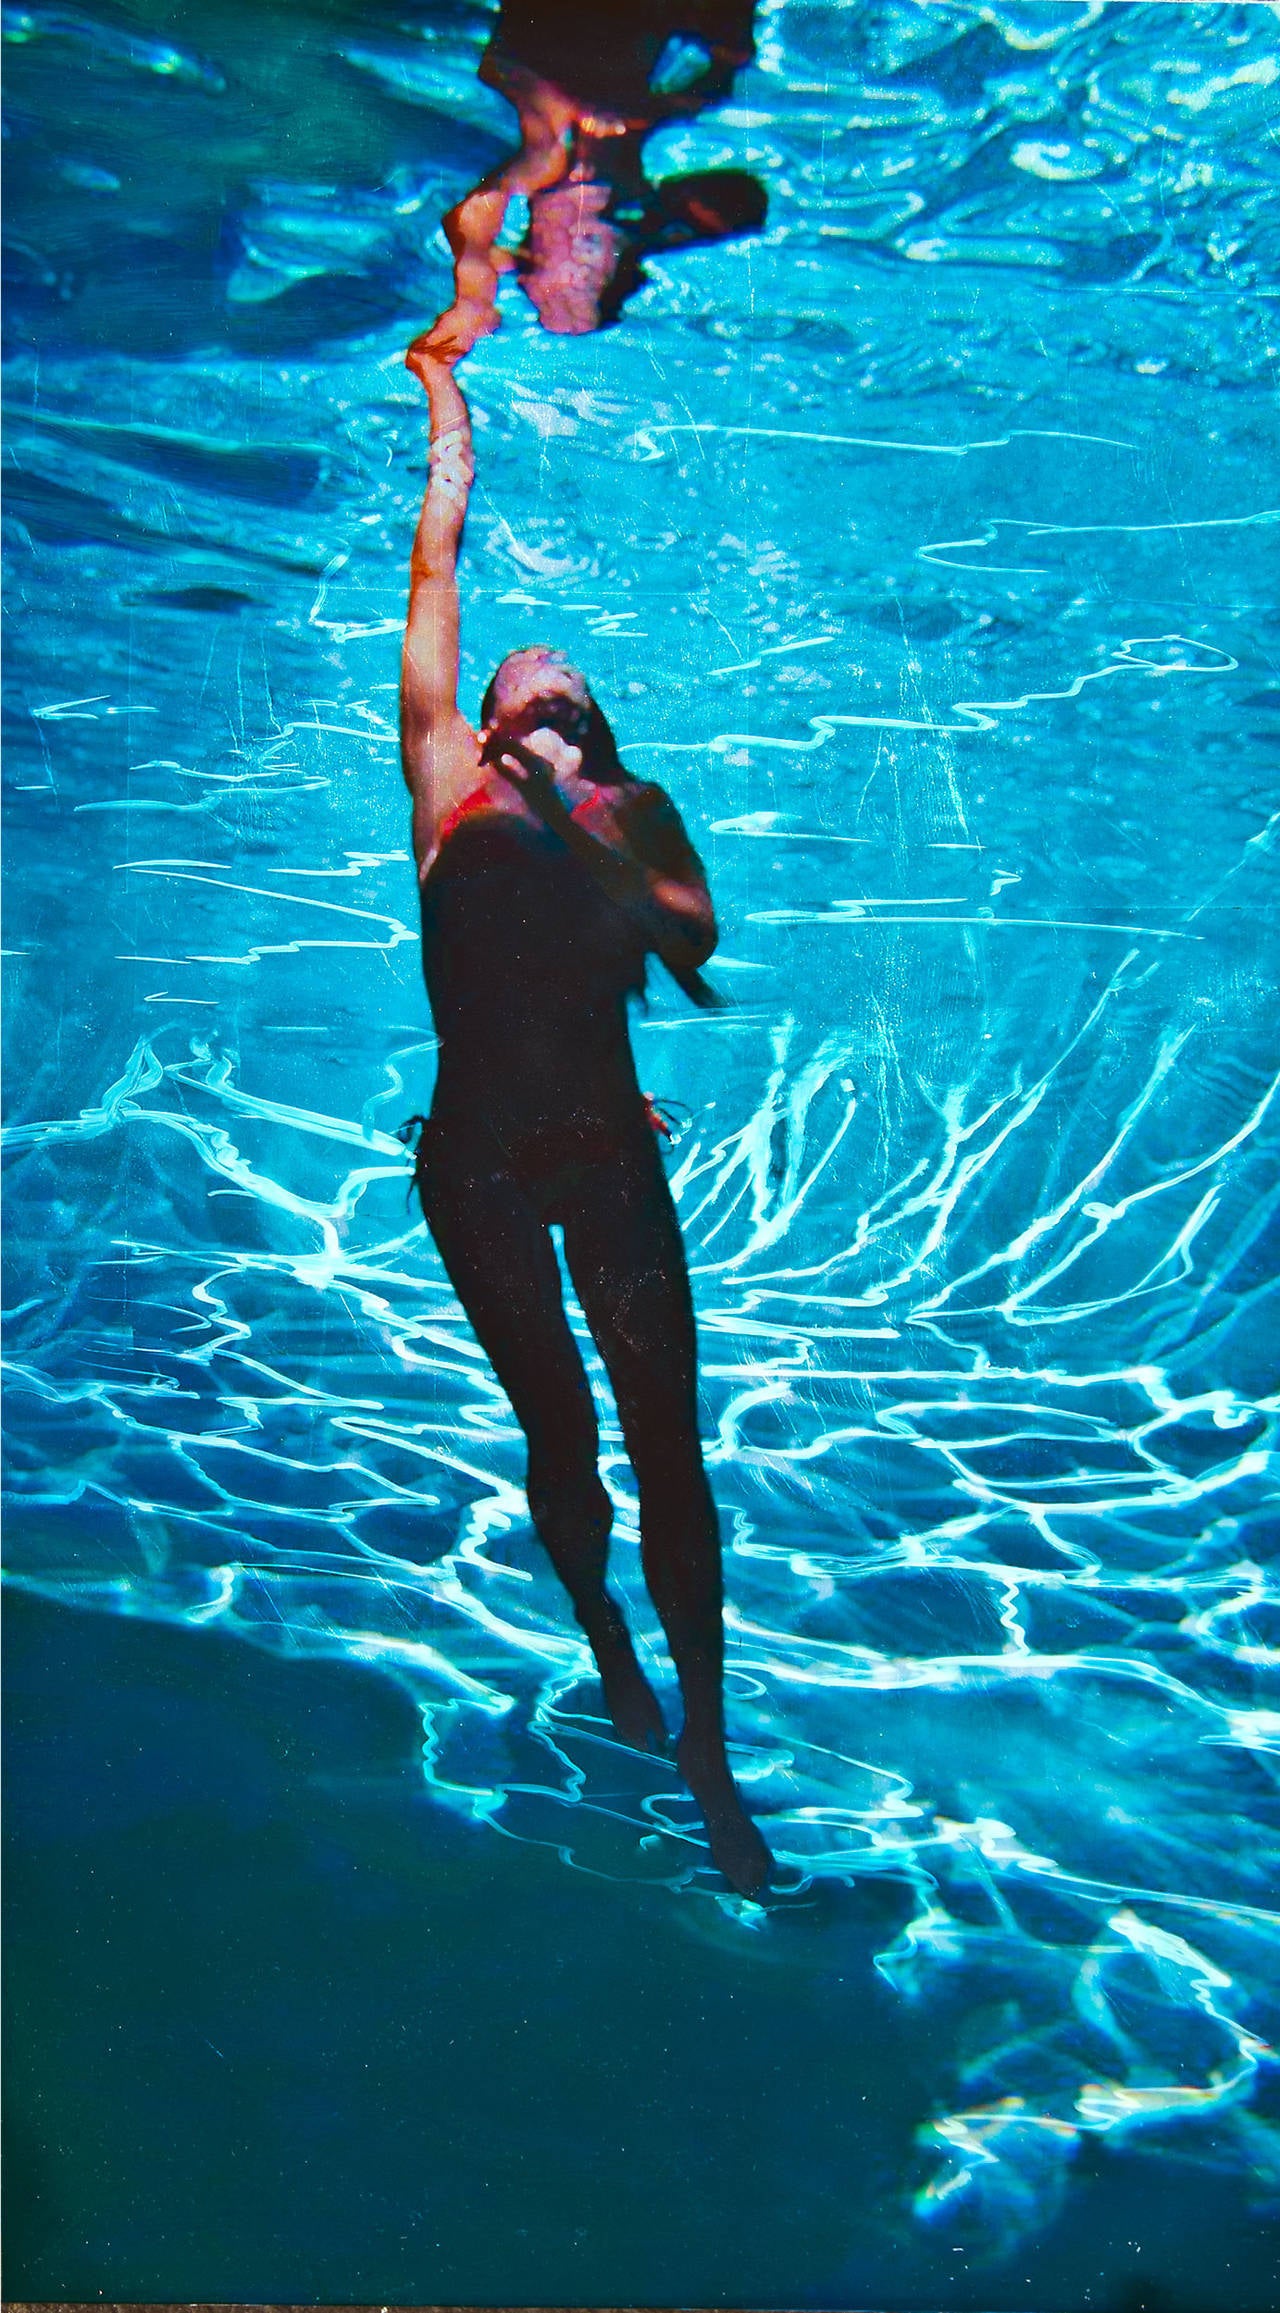 Eric Zener Color Photograph - Reaching Through the Darkness